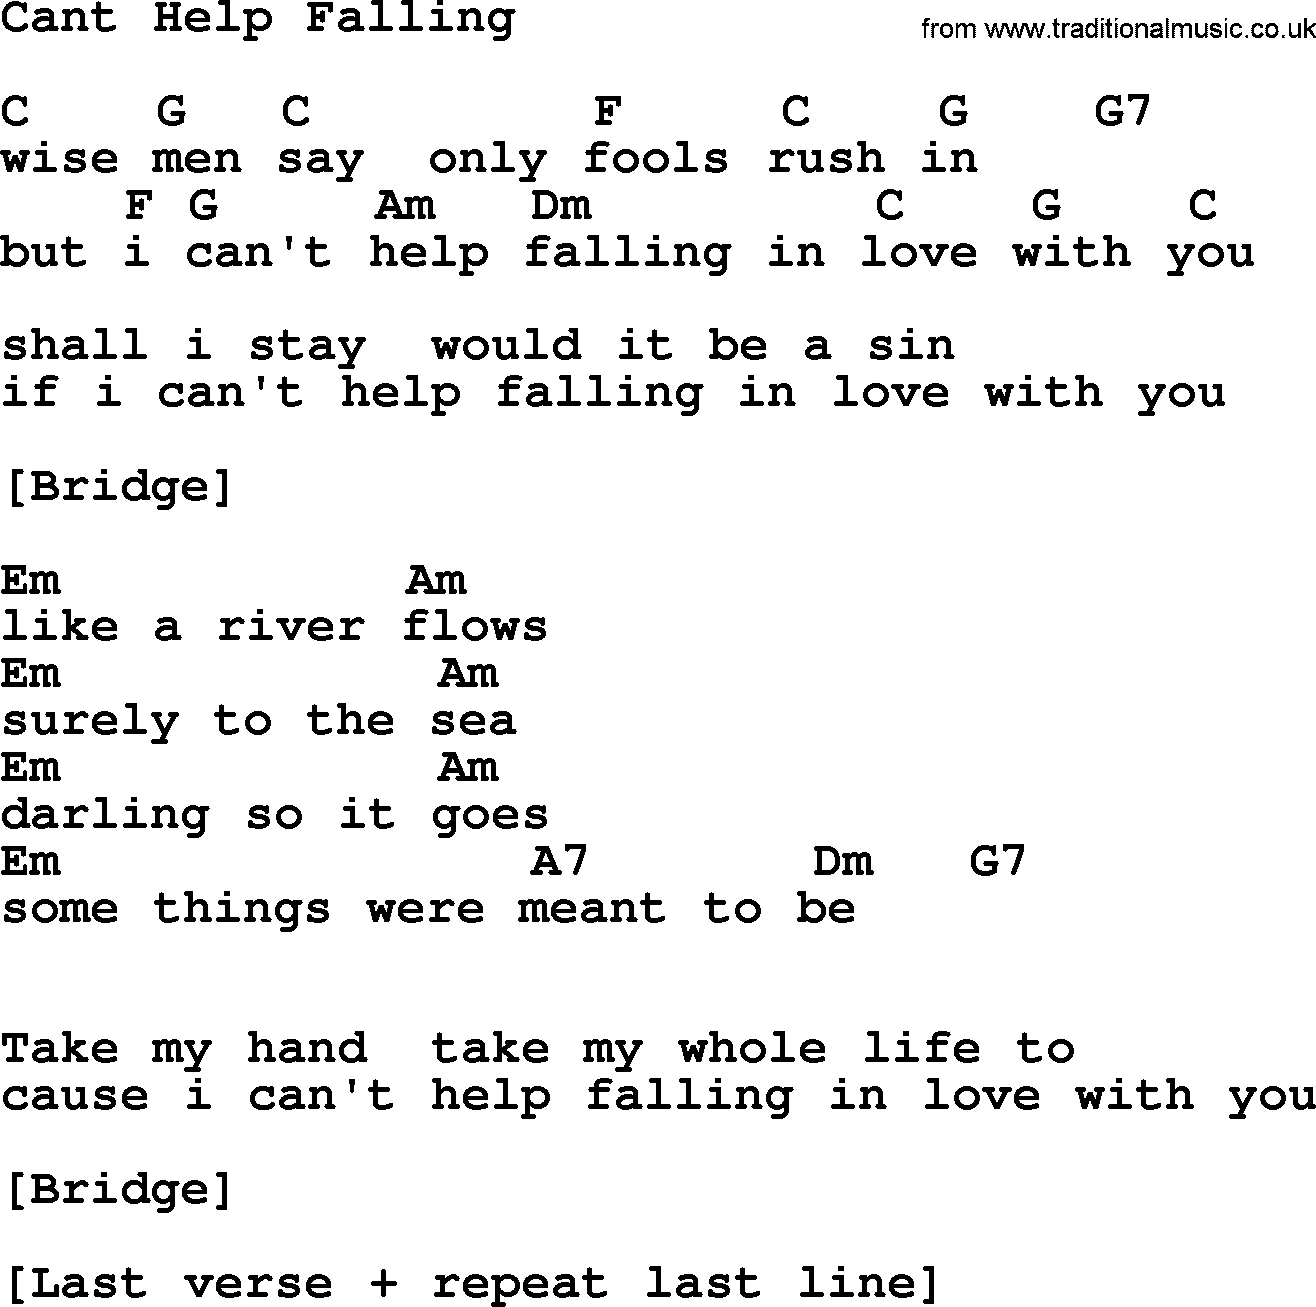 Elvis Presley song: Cant Help Falling, lyrics and chords